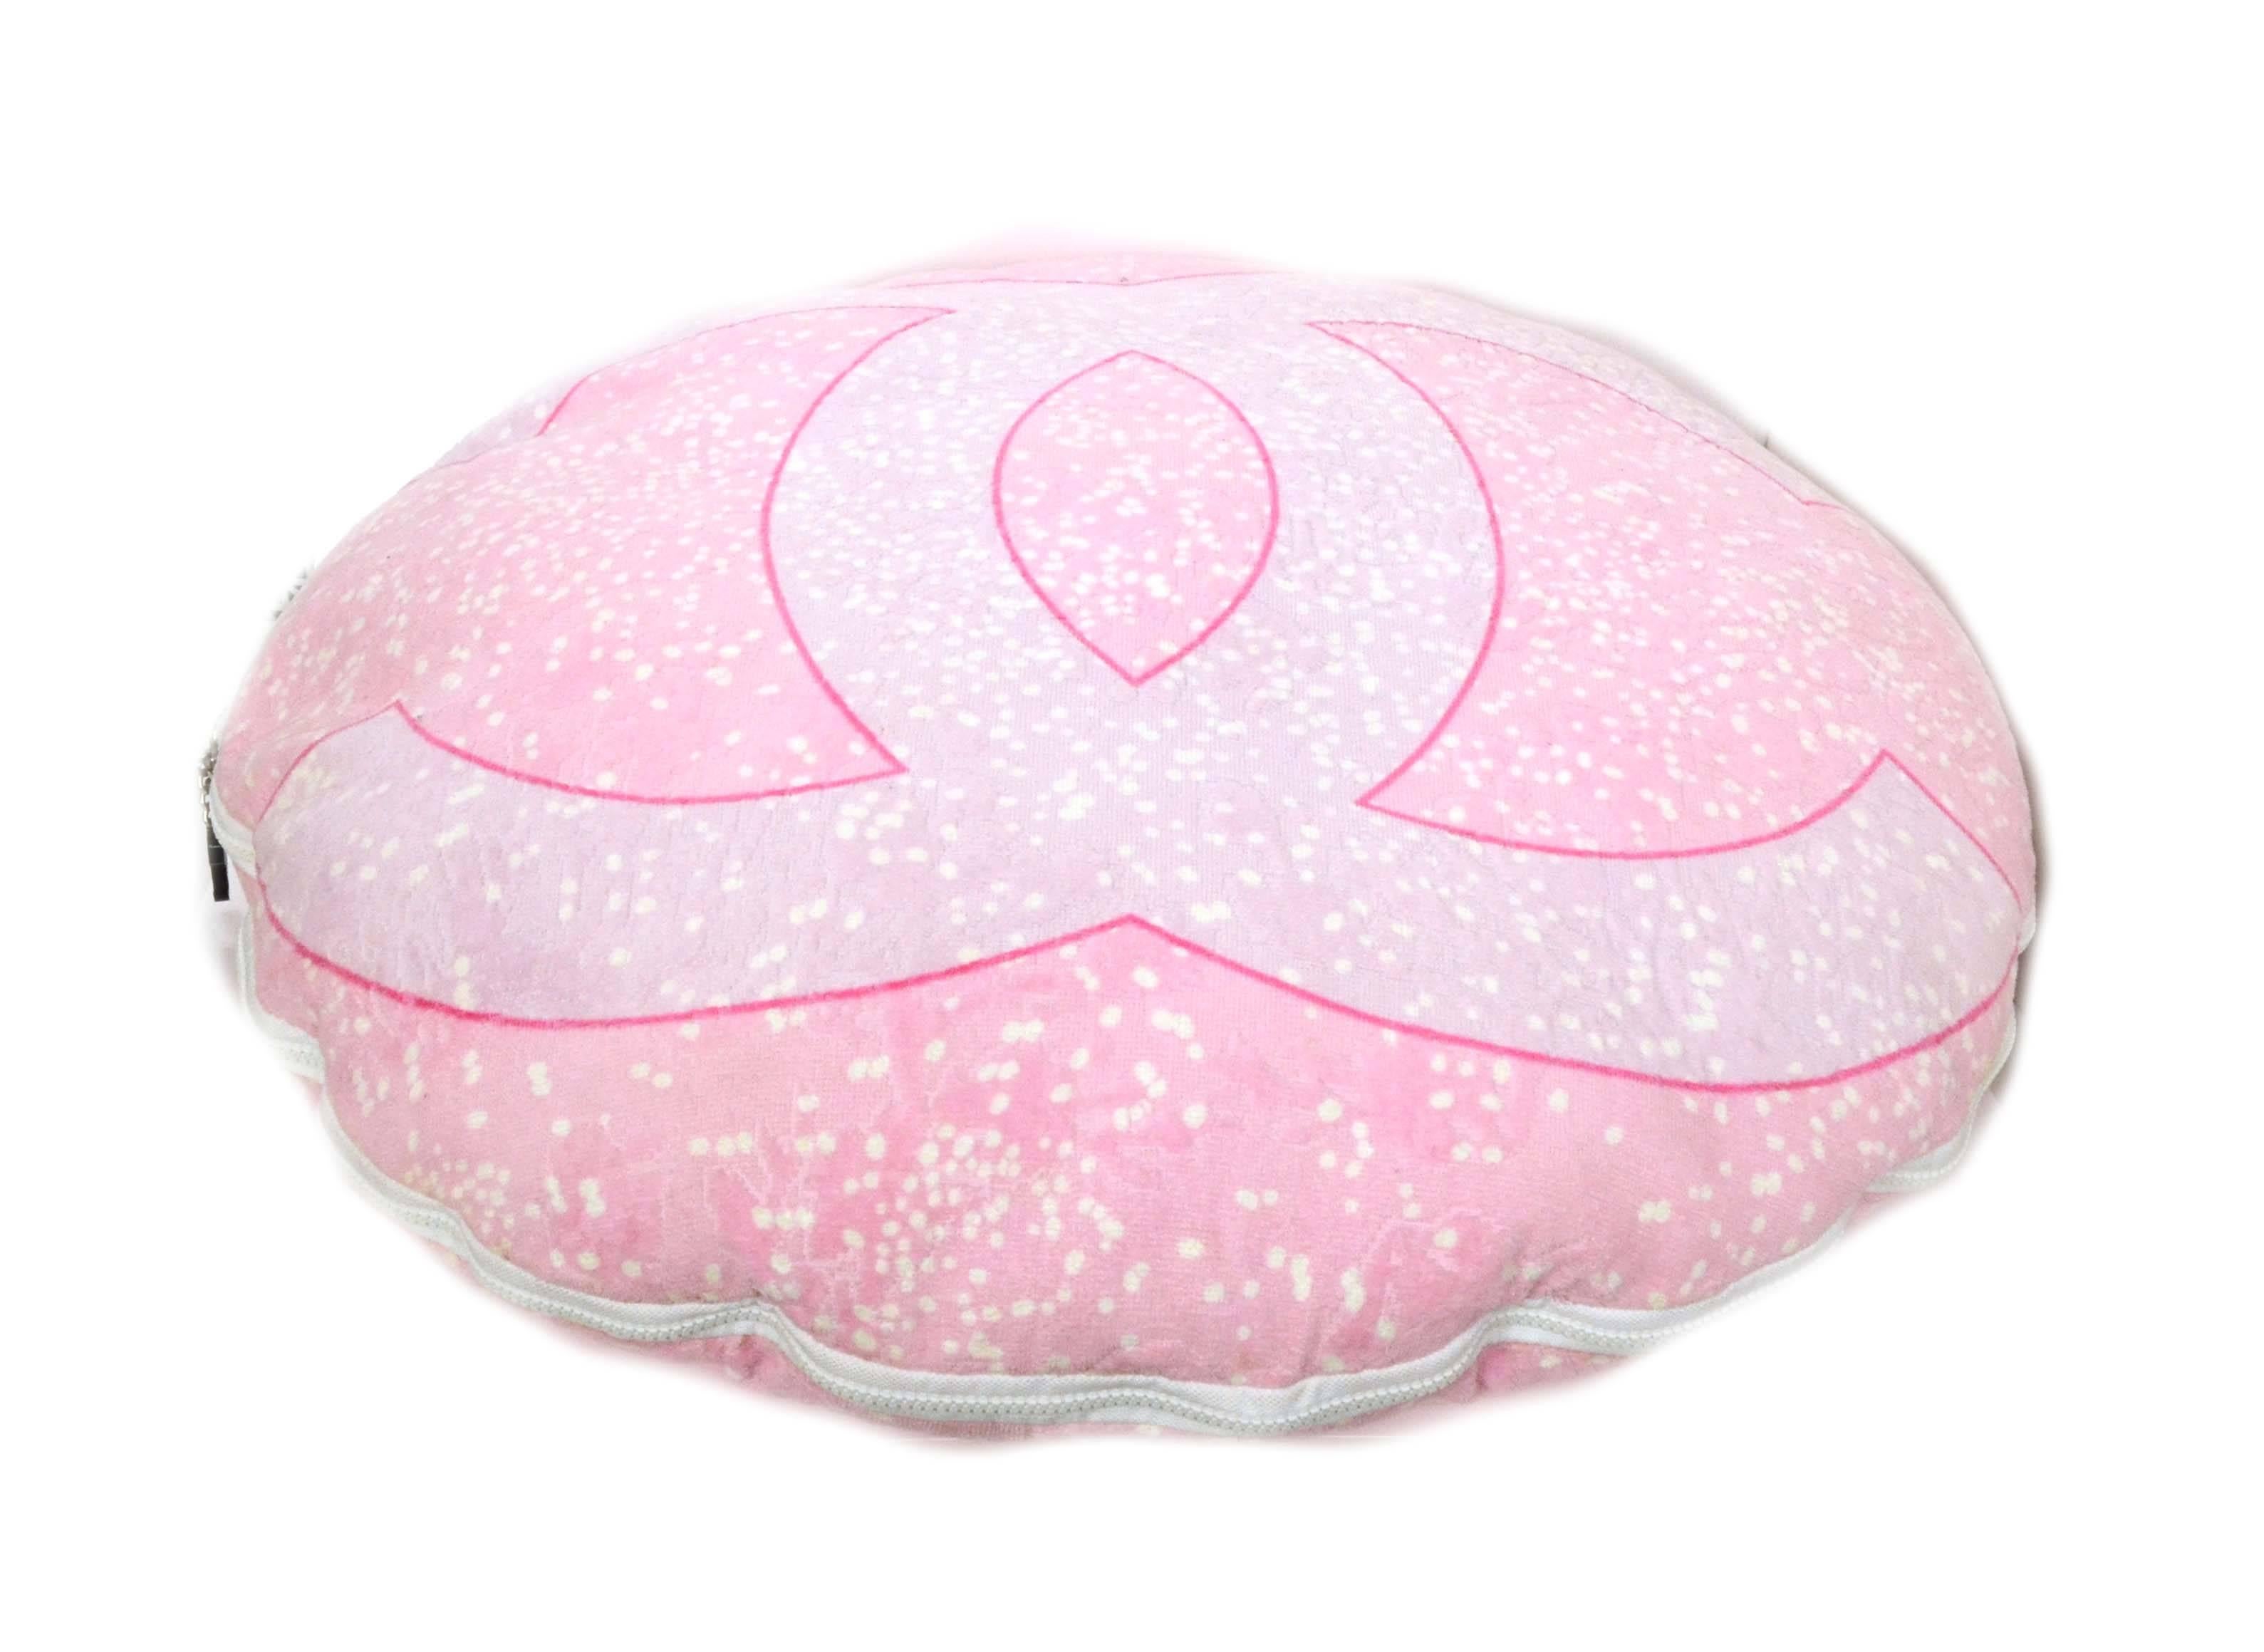 Chanel Pink & White Terrycloth Floor Cushion/Pillow 
Features black resin CC zipper pulls
Color: Light pink, dark pink and white
Composition: Believed to be a terrycloth blend
Closure: Double zip around closure
Overall Condition: Very good with